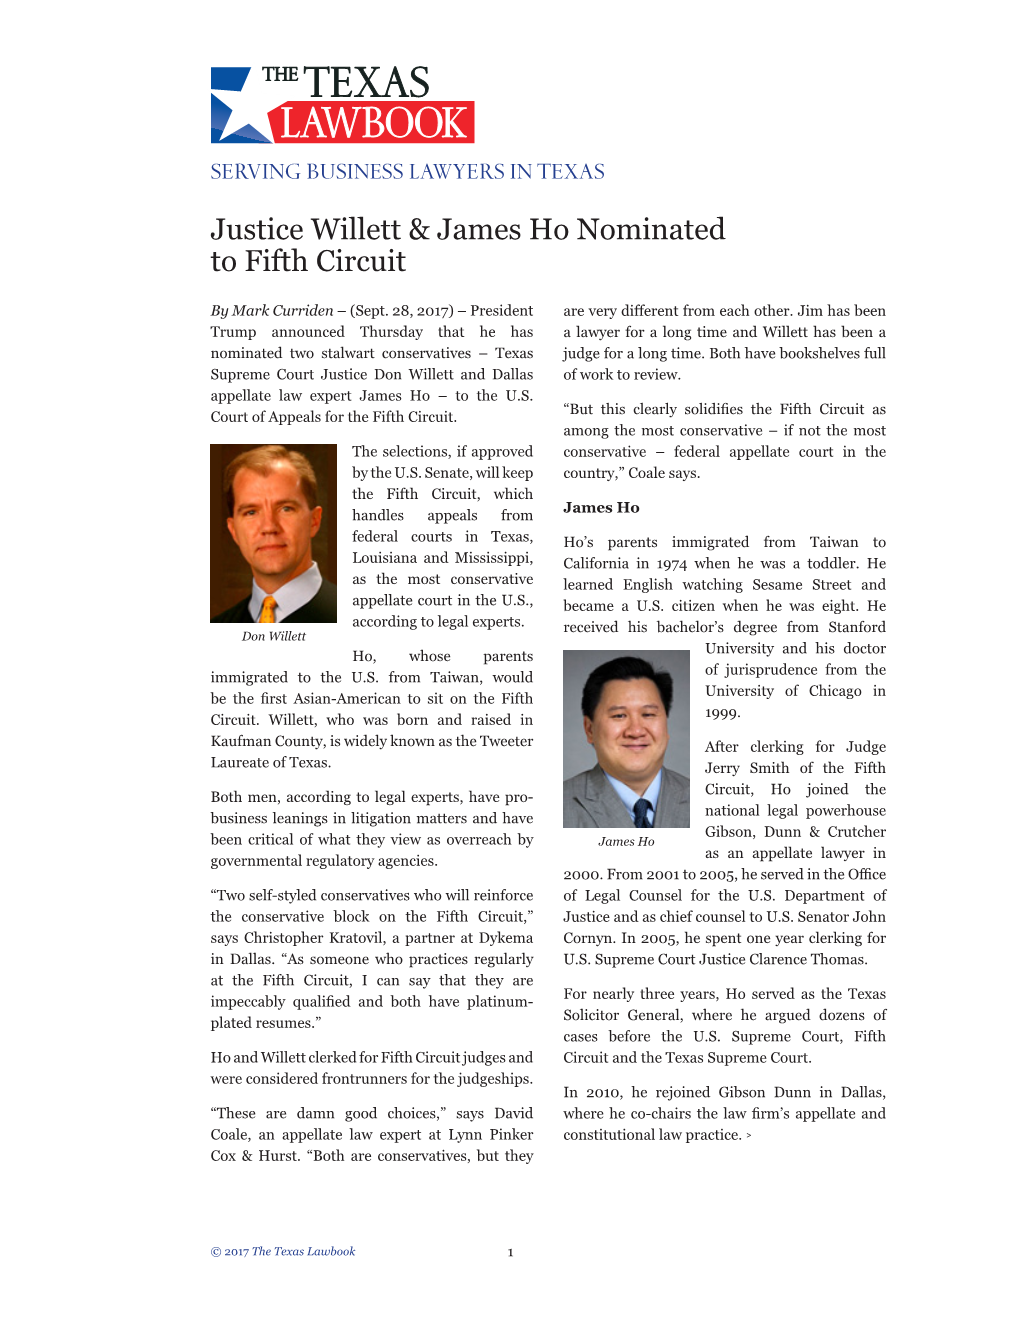 Justice Willett & James Ho Nominated to Fifth Circuit